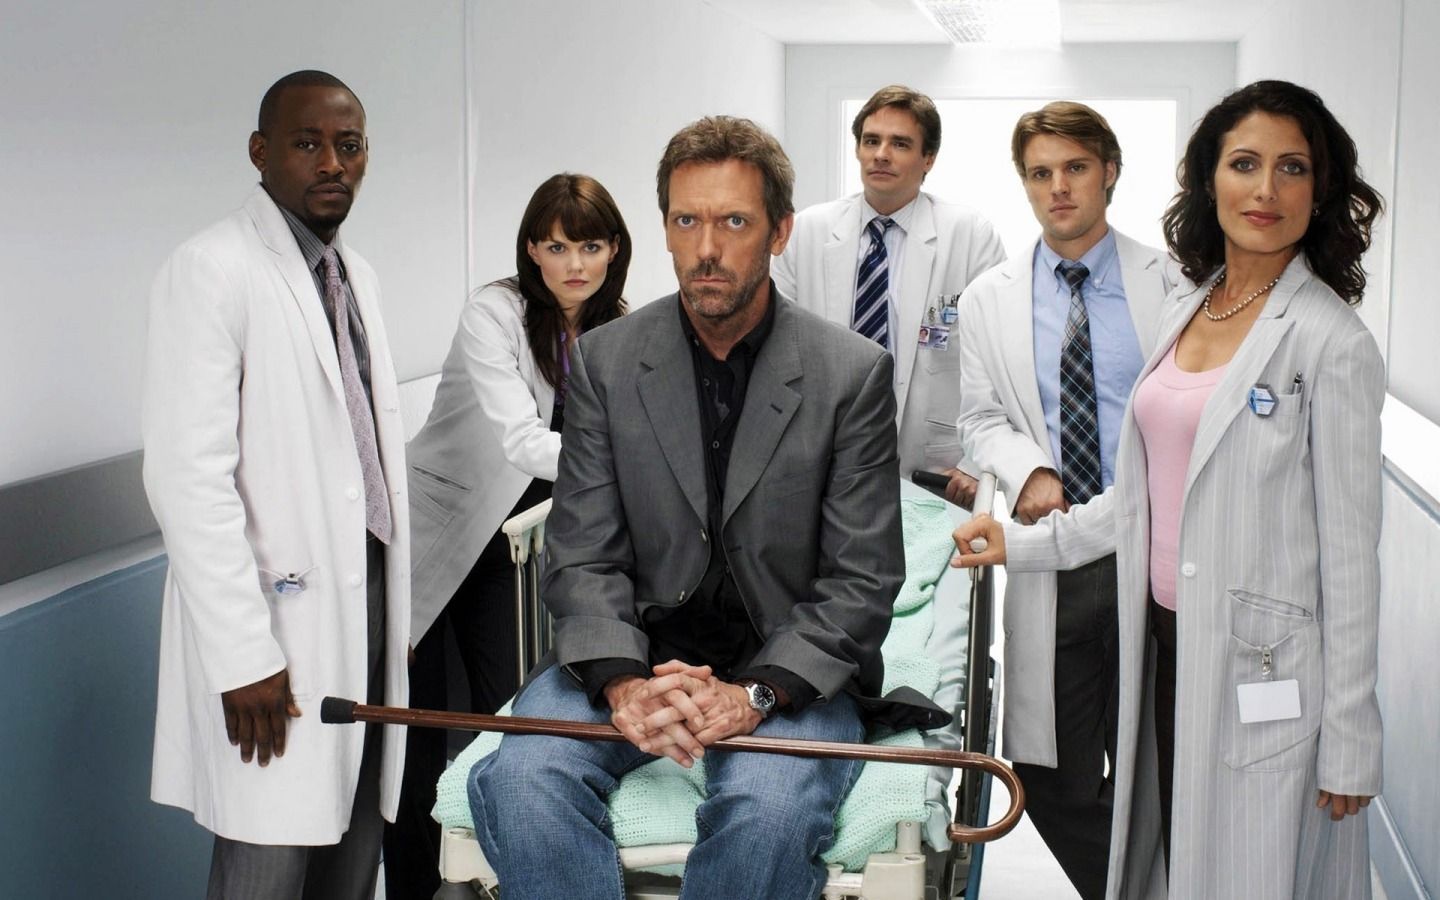 go-to-fake-medical-school-with-these-tv-shows-all-about-doctors-film